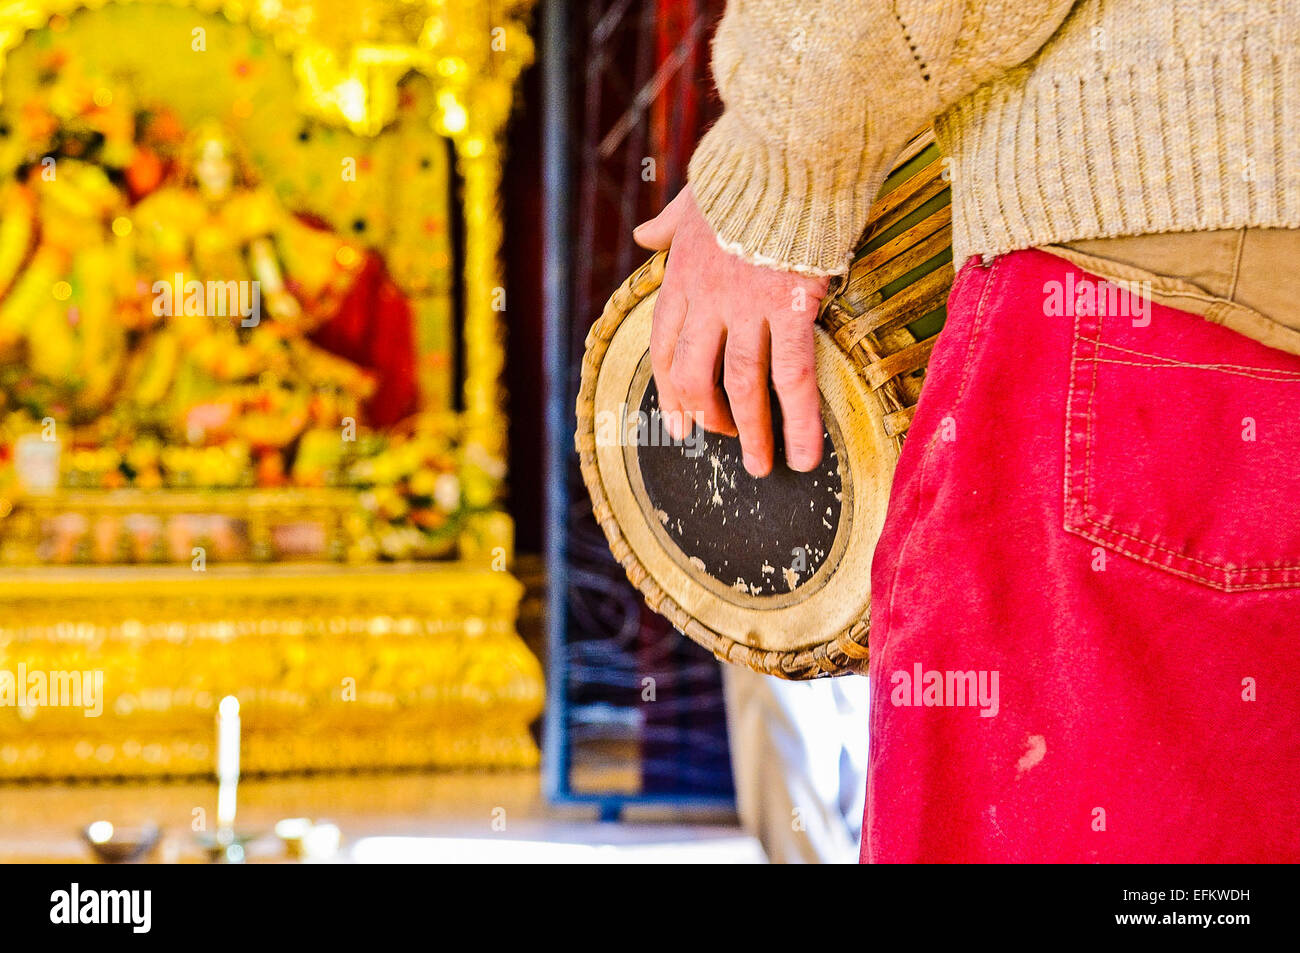 A Hare Krishna devotee plays a mrdanga drum in front of an altar in the temple room. Stock Photo